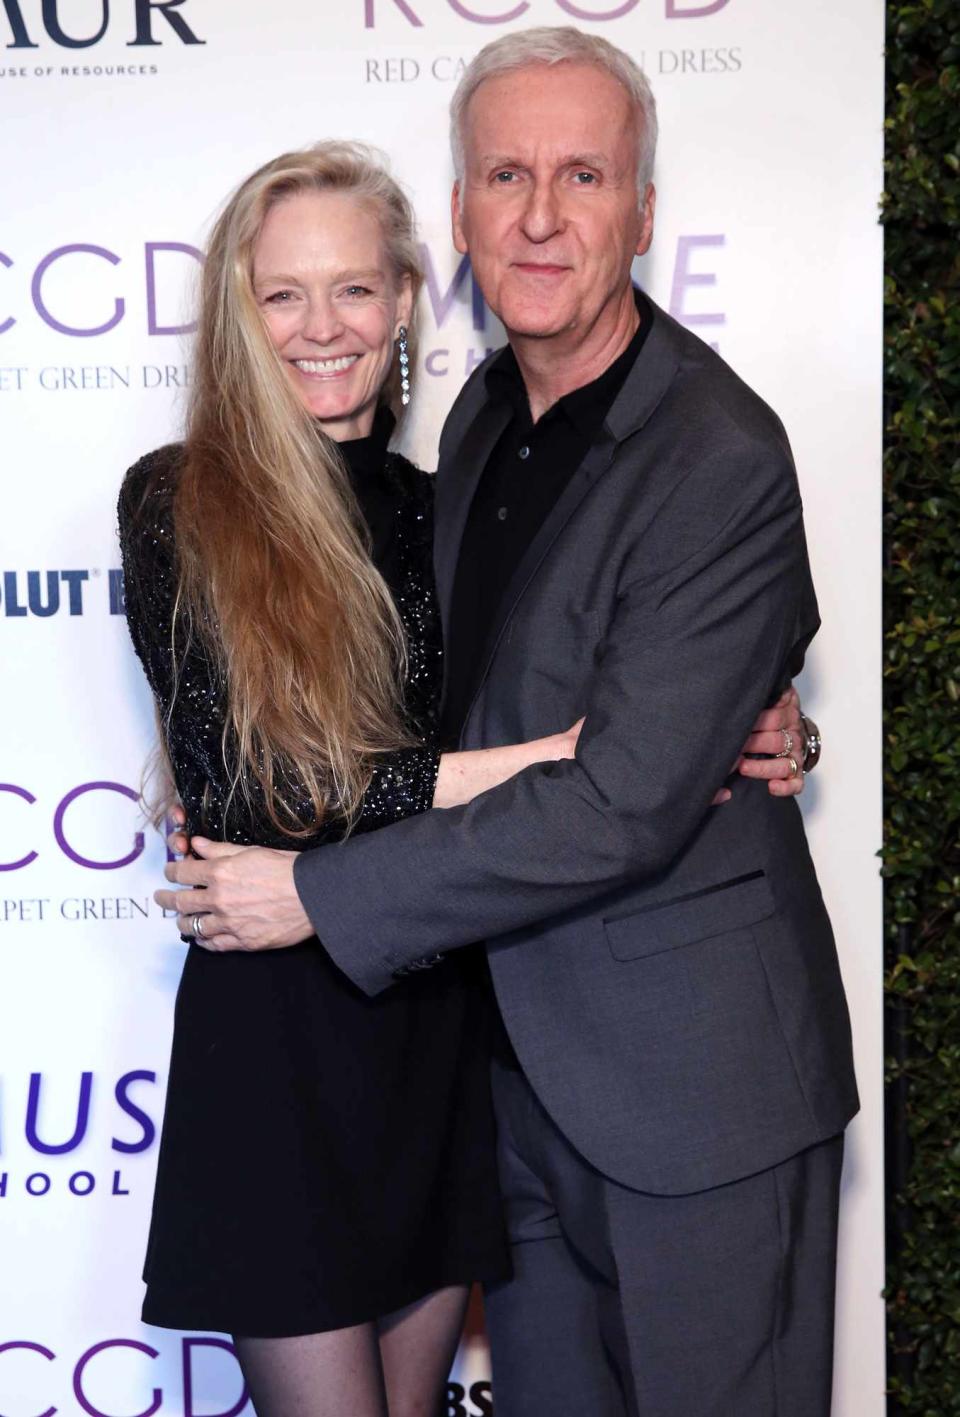 Suzy Amis Cameron and James Cameron attend Suzy Amis Cameron's 10-Year Anniversary Of RCGD Celebration on February 21, 2019 in Beverly Hills, California